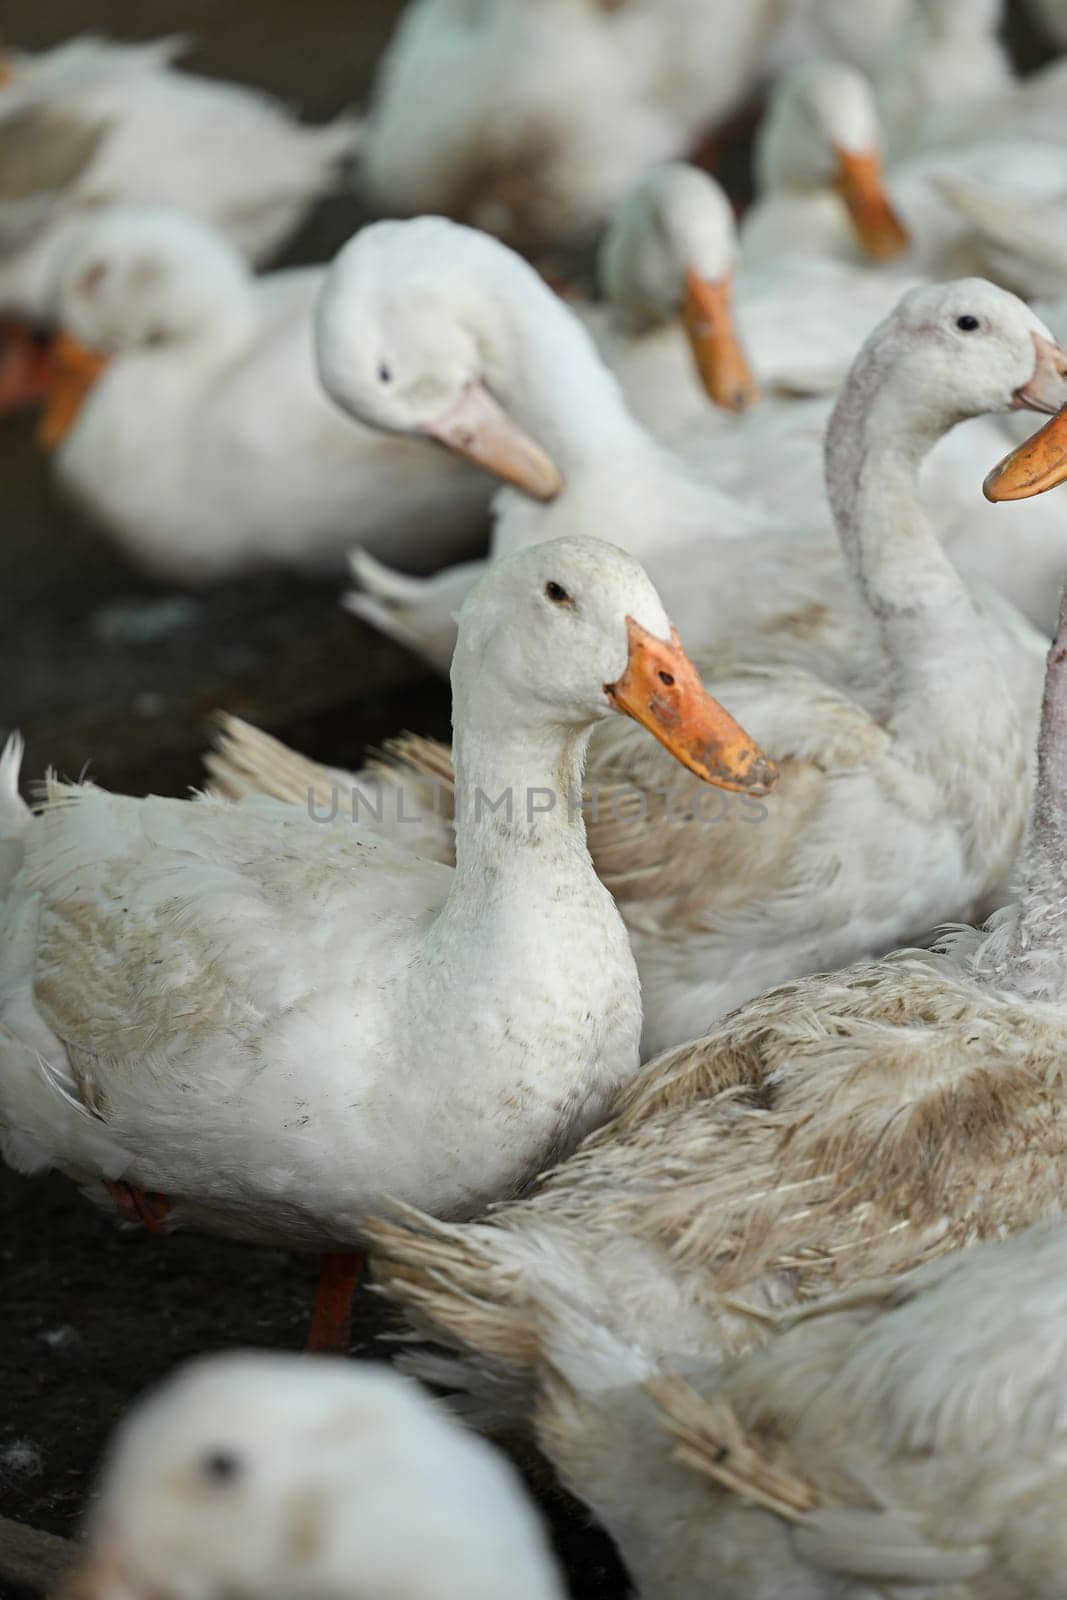 Flock of white domestic duck on the rural farm. Poultry and subsistence farming concept.